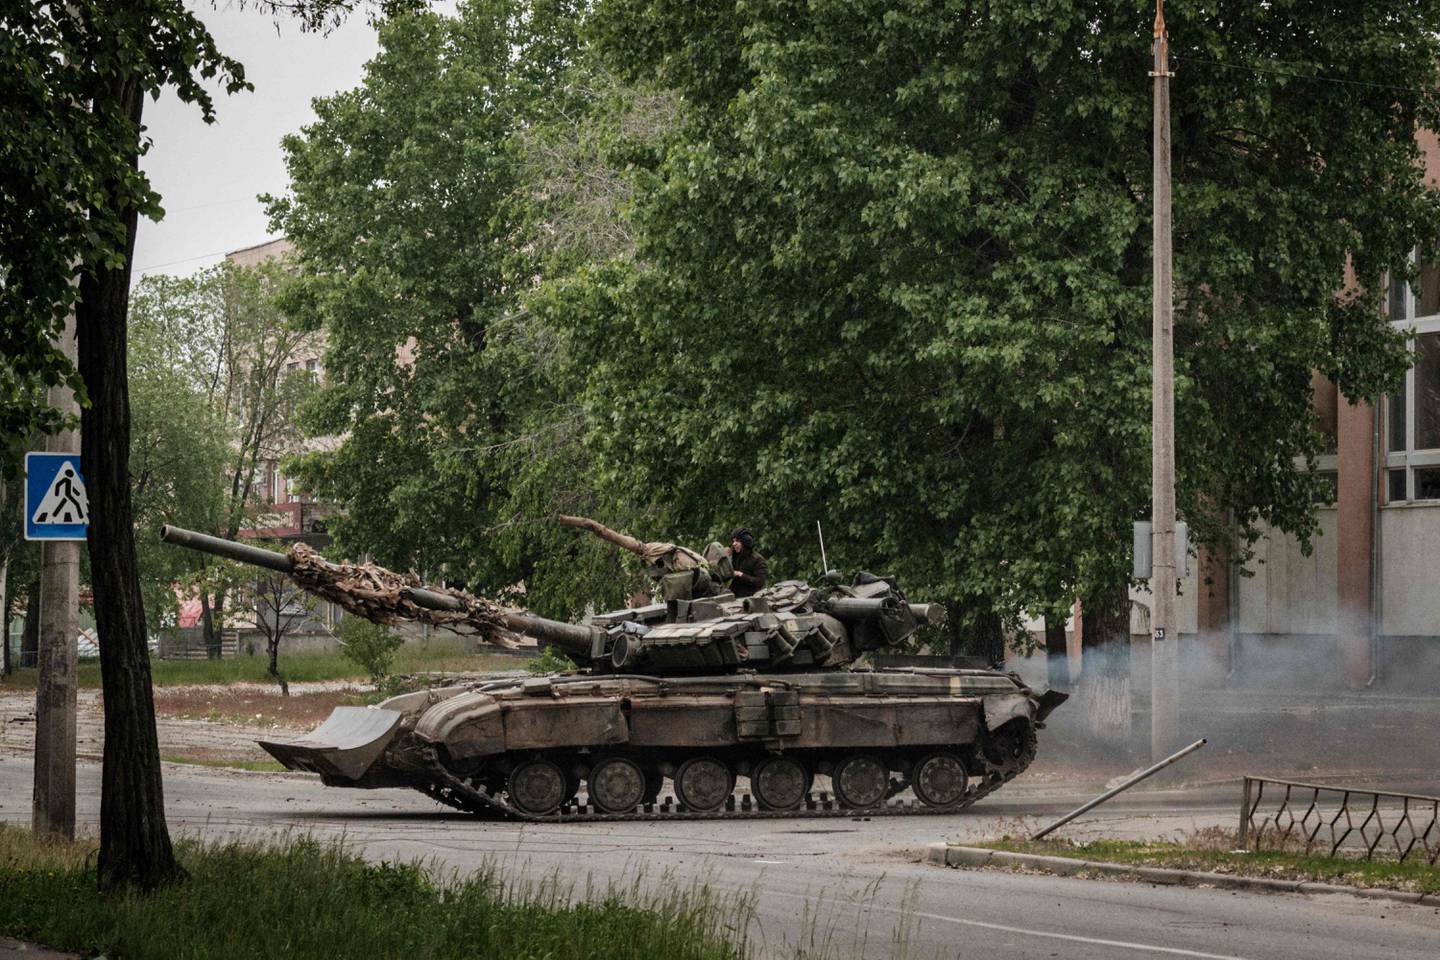 A Ukrainian main battle tank drives on a street during nearby mortar shelling in Severodonetsk, eastern Ukraine, on May 18, 2022, on the 84th day of the Russian invasion of Ukraine. AFP